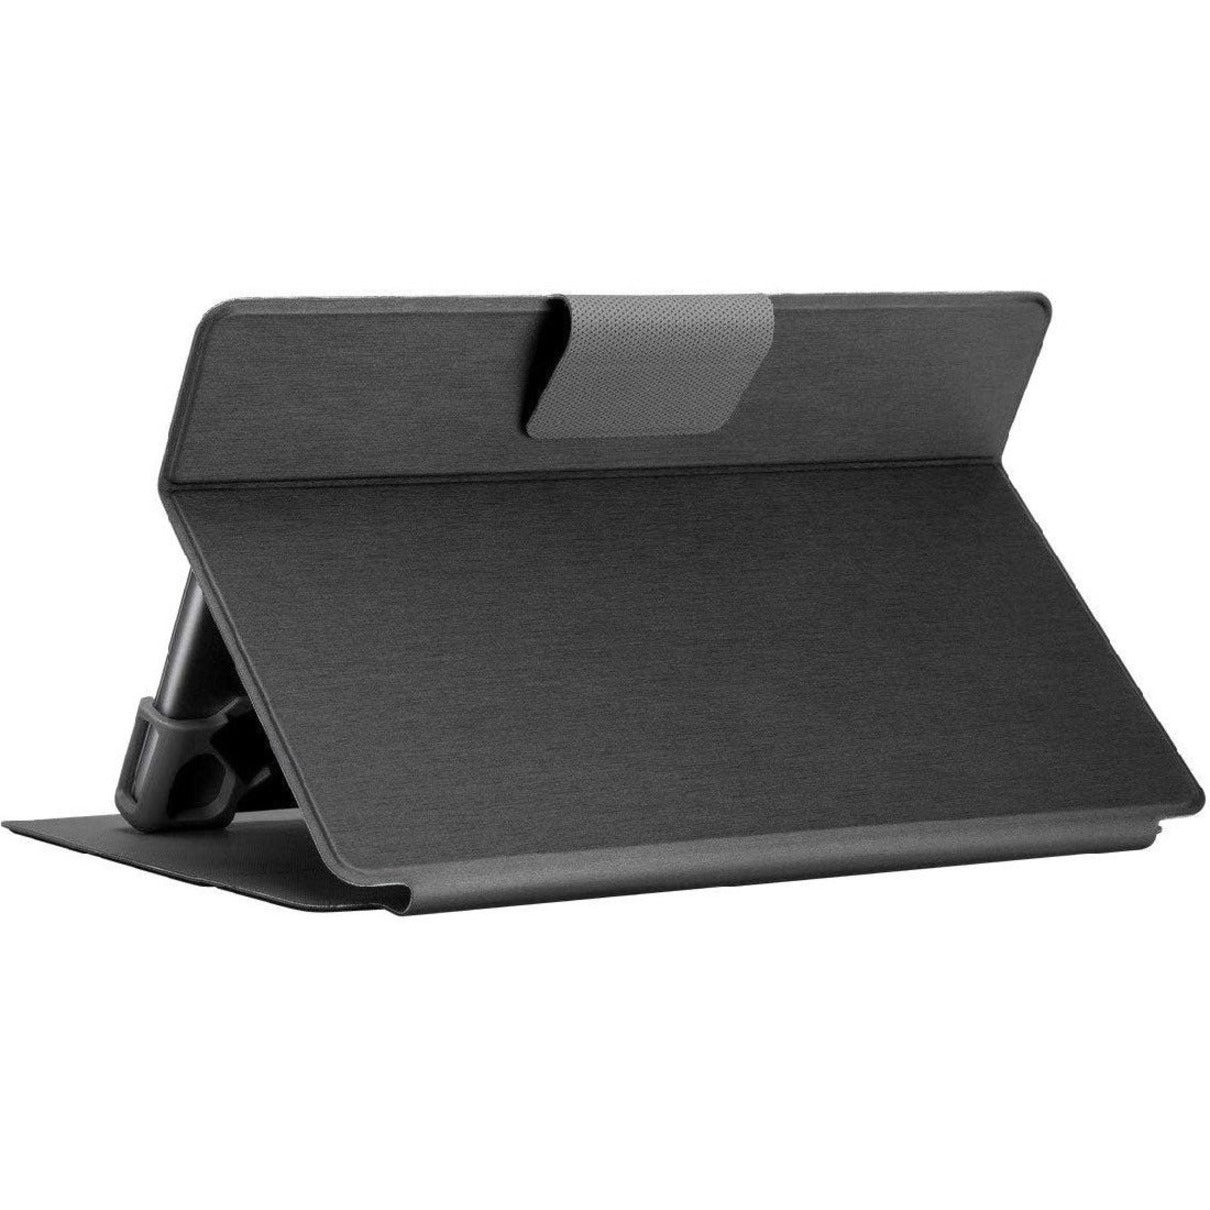 Targus SafeFit THZ785GL Carrying Case (Folio) for 9" to 11" Tablet - Black